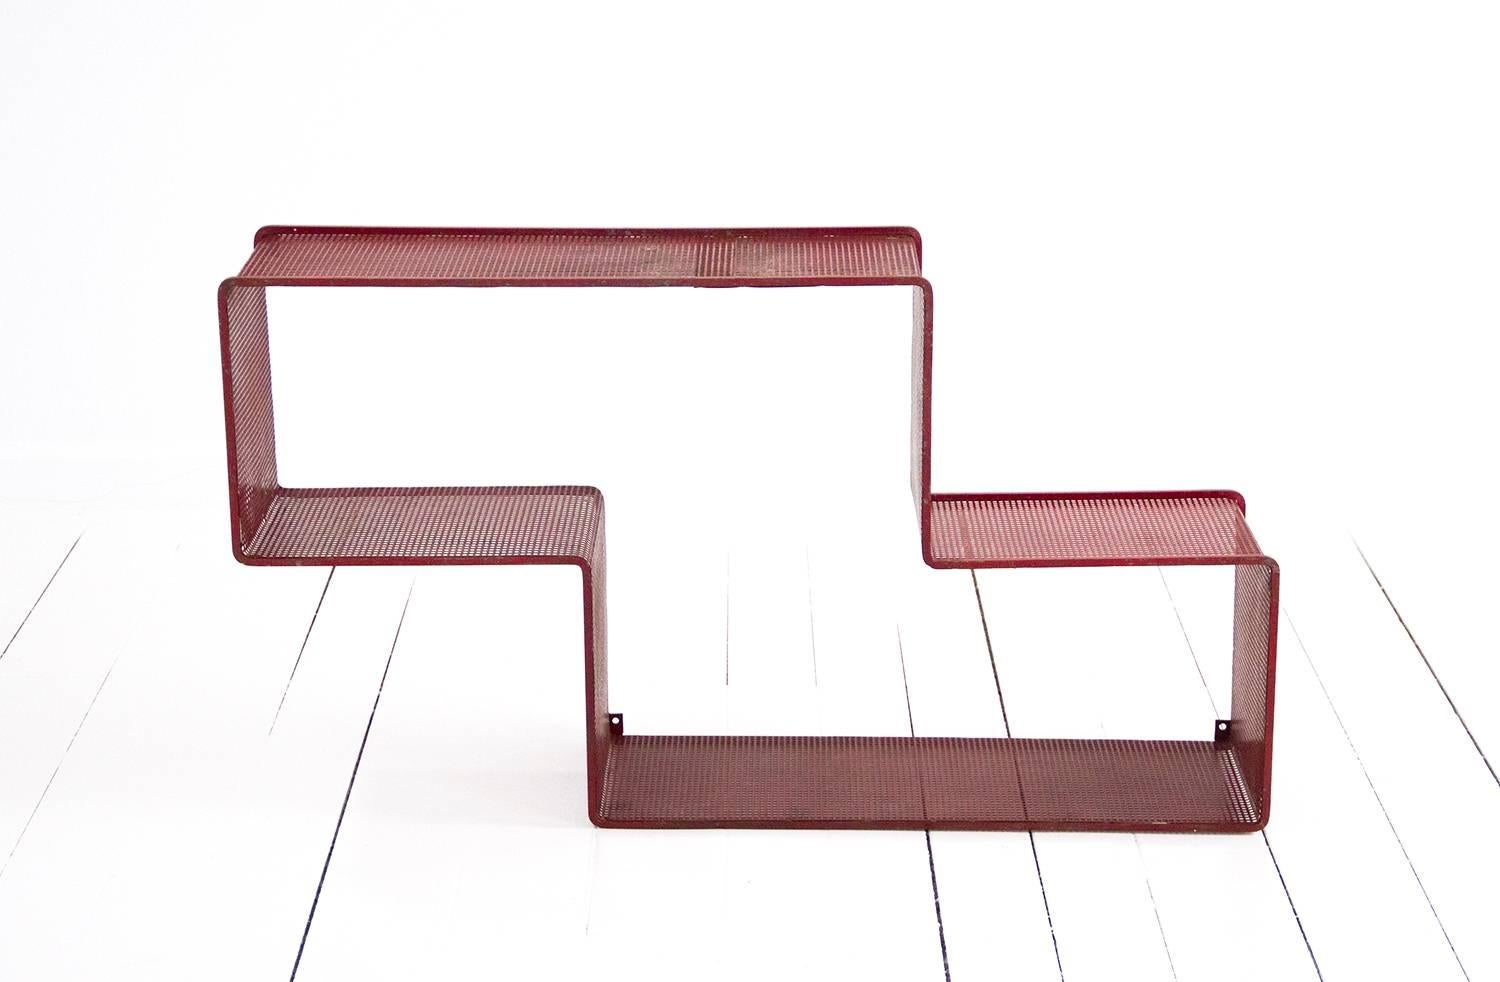 Red 'Dedal' wall shelf designed by Mathieu Matégot.
Made of perforated steel. Preserving the original patina. 
France, circa 1950. Manufactured in France by Ateliers Matégot.
  